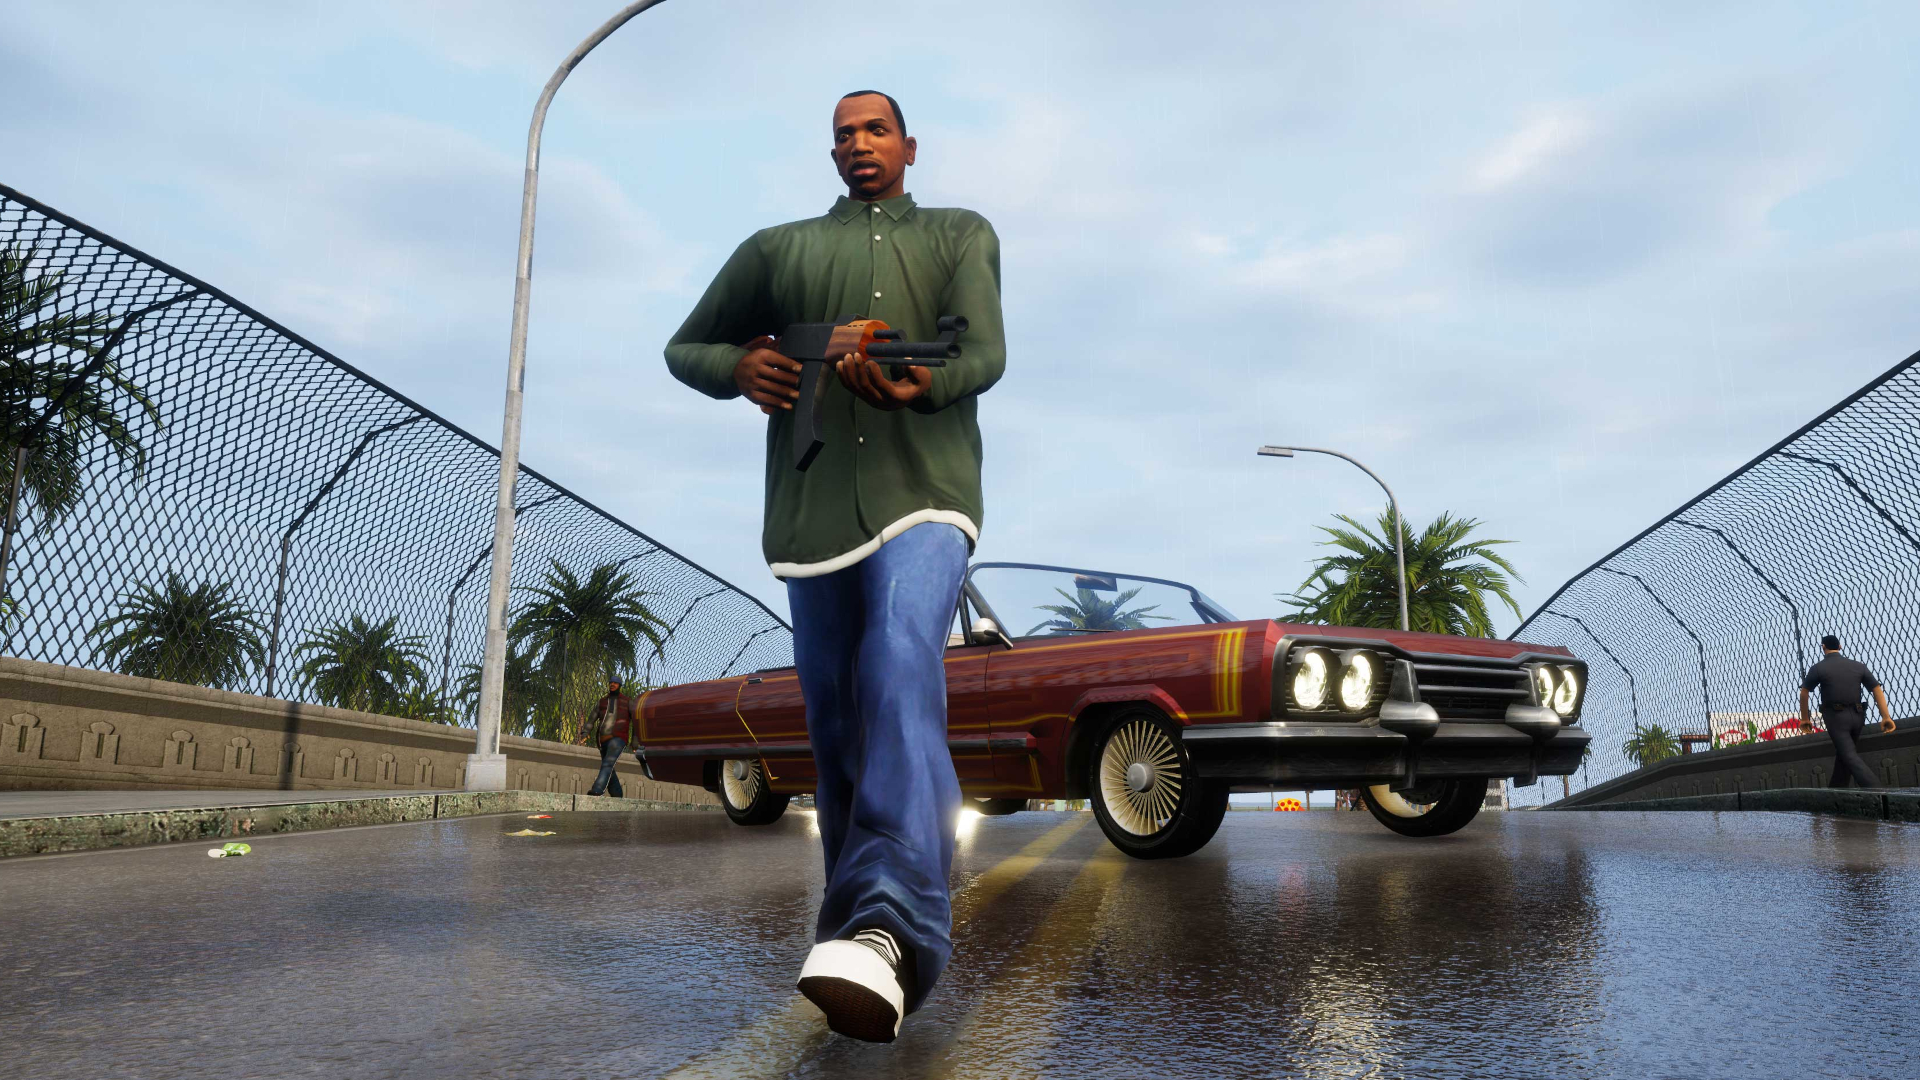 Gamingnews on X: Looks like GTA: Vice City Remastered is coming